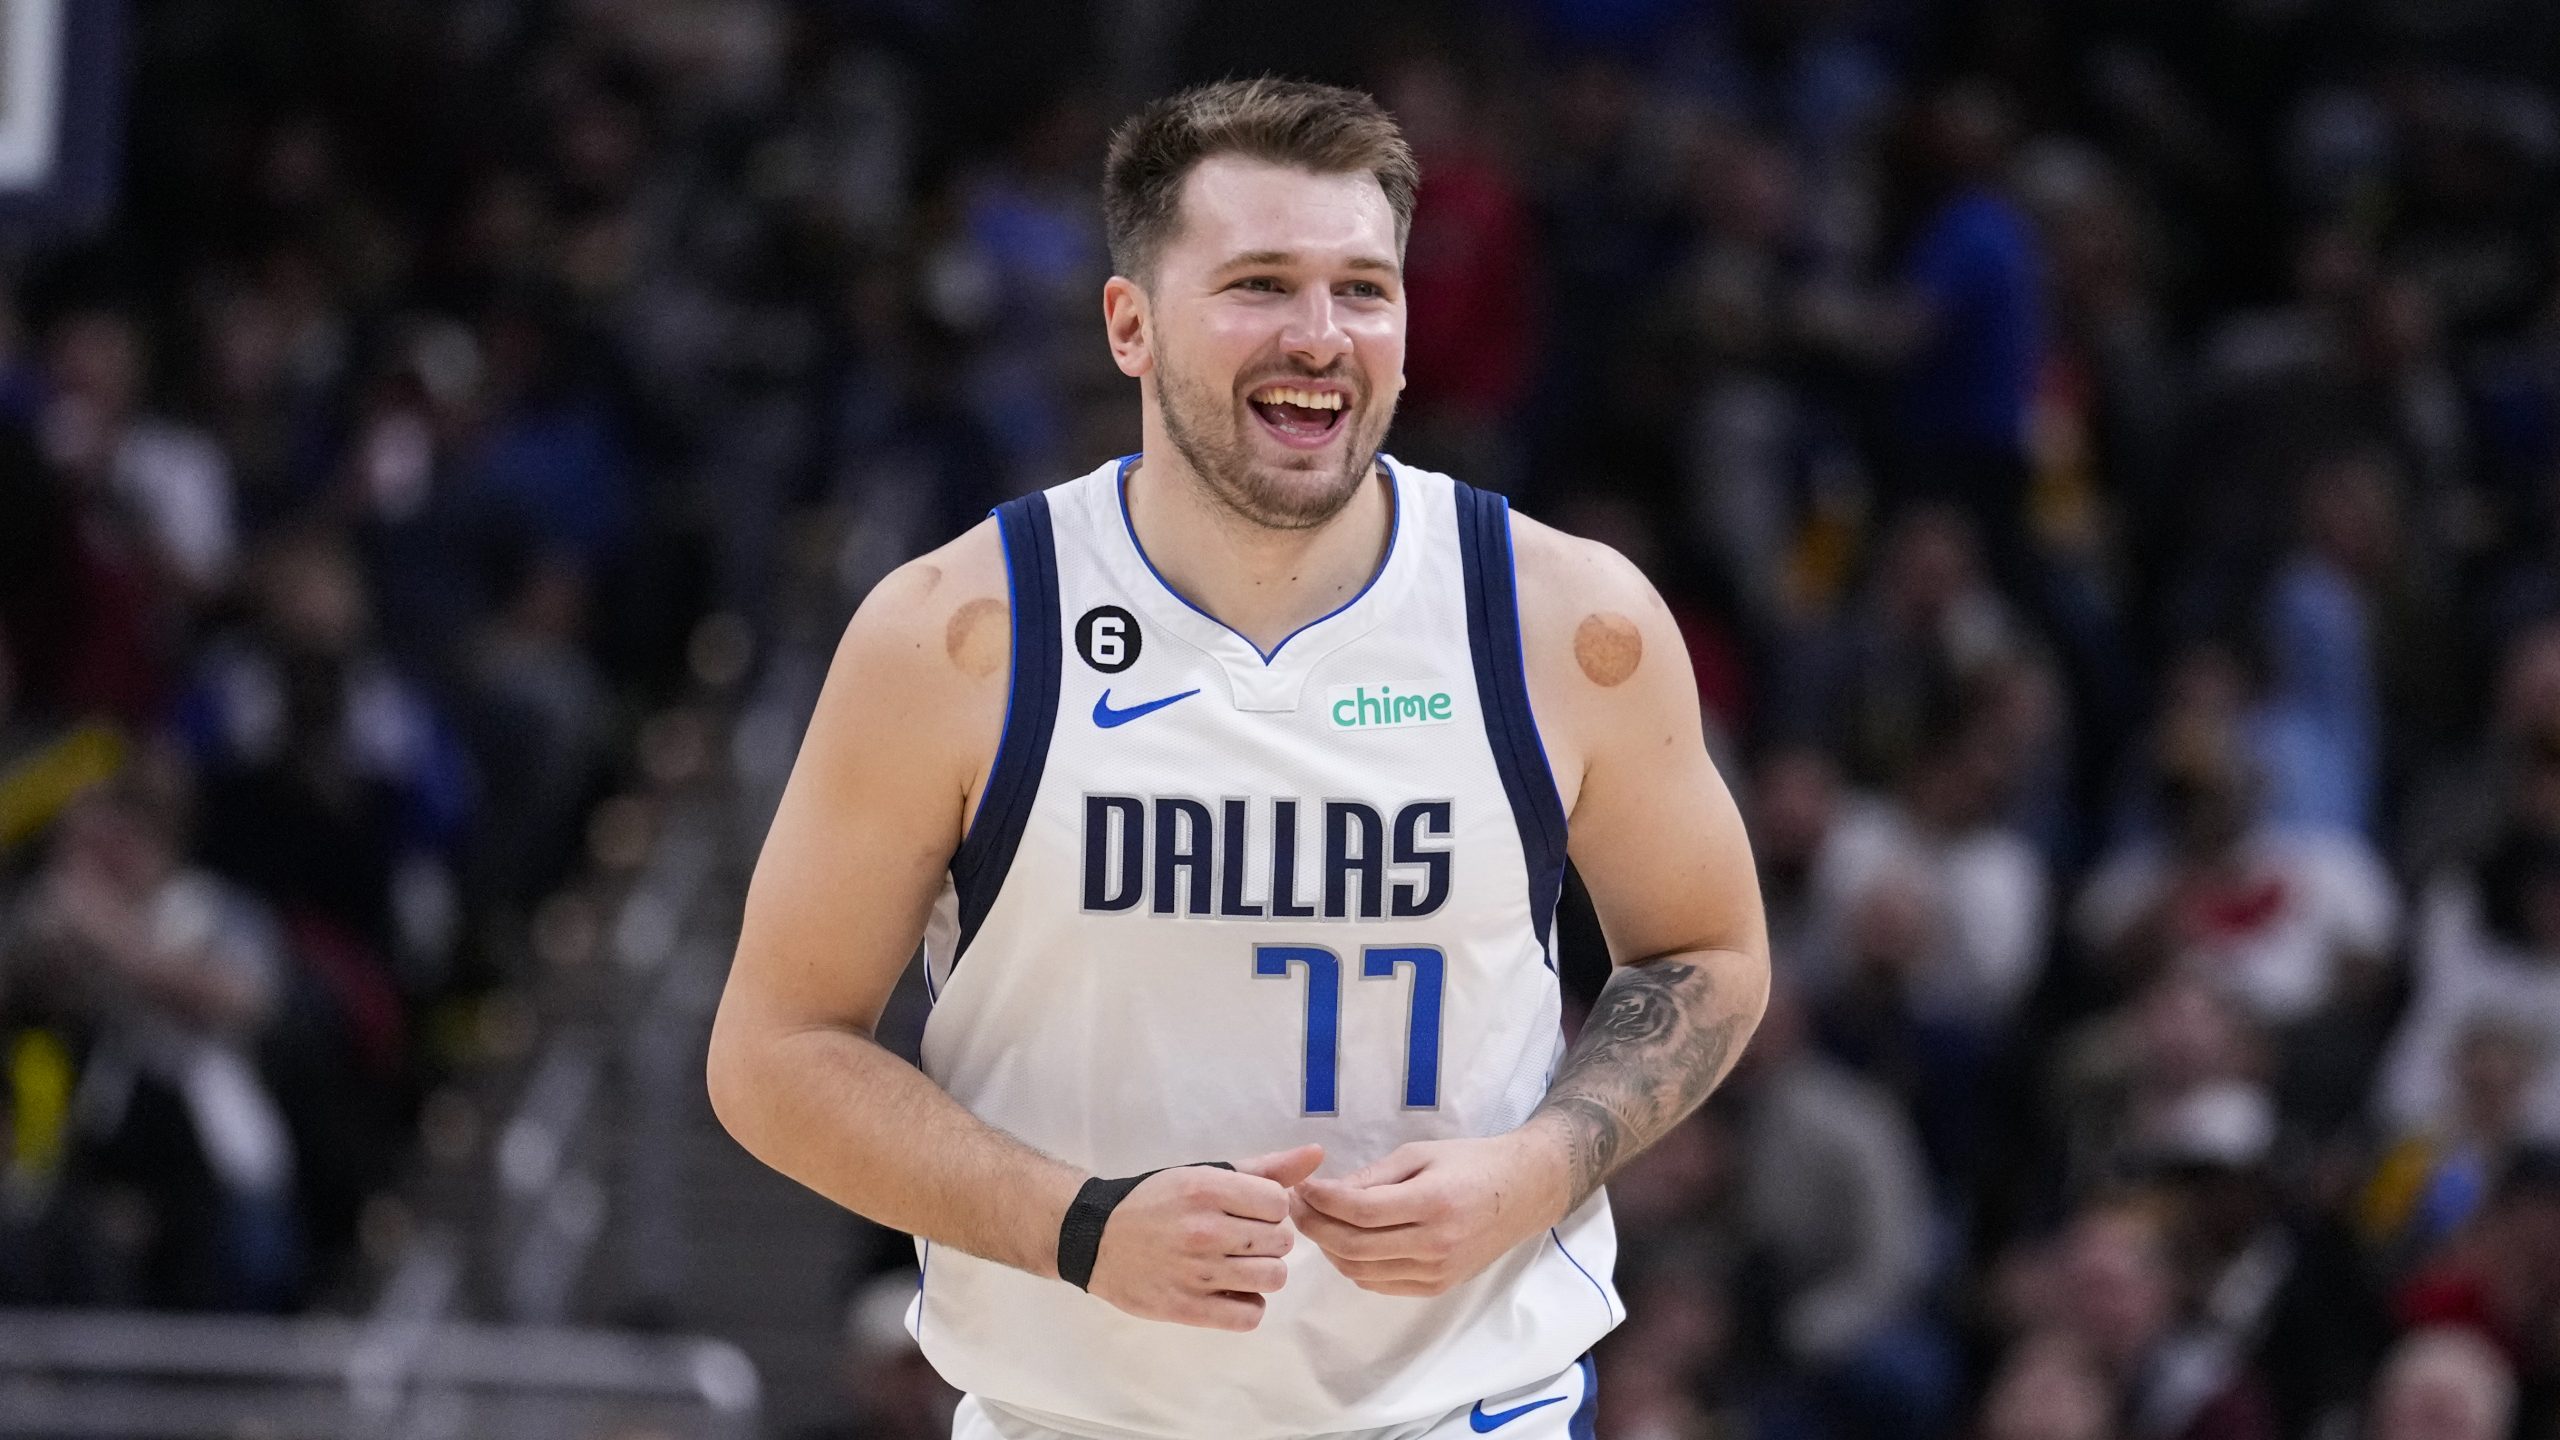 Luka Doncic becomes youngest player to win EuroLeague MVP